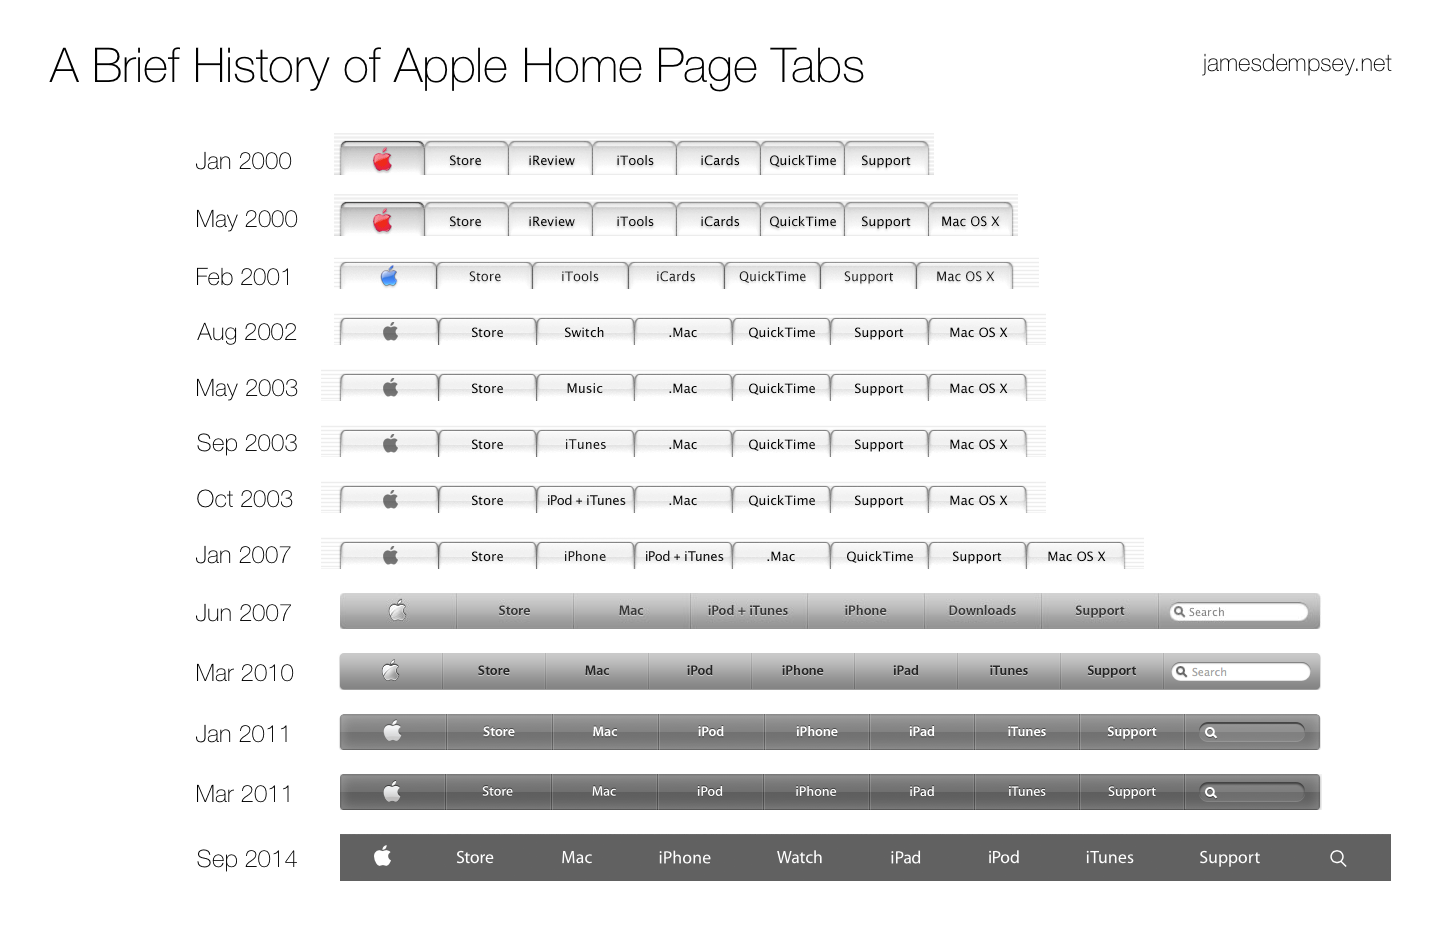 Apple Home Page Tab History